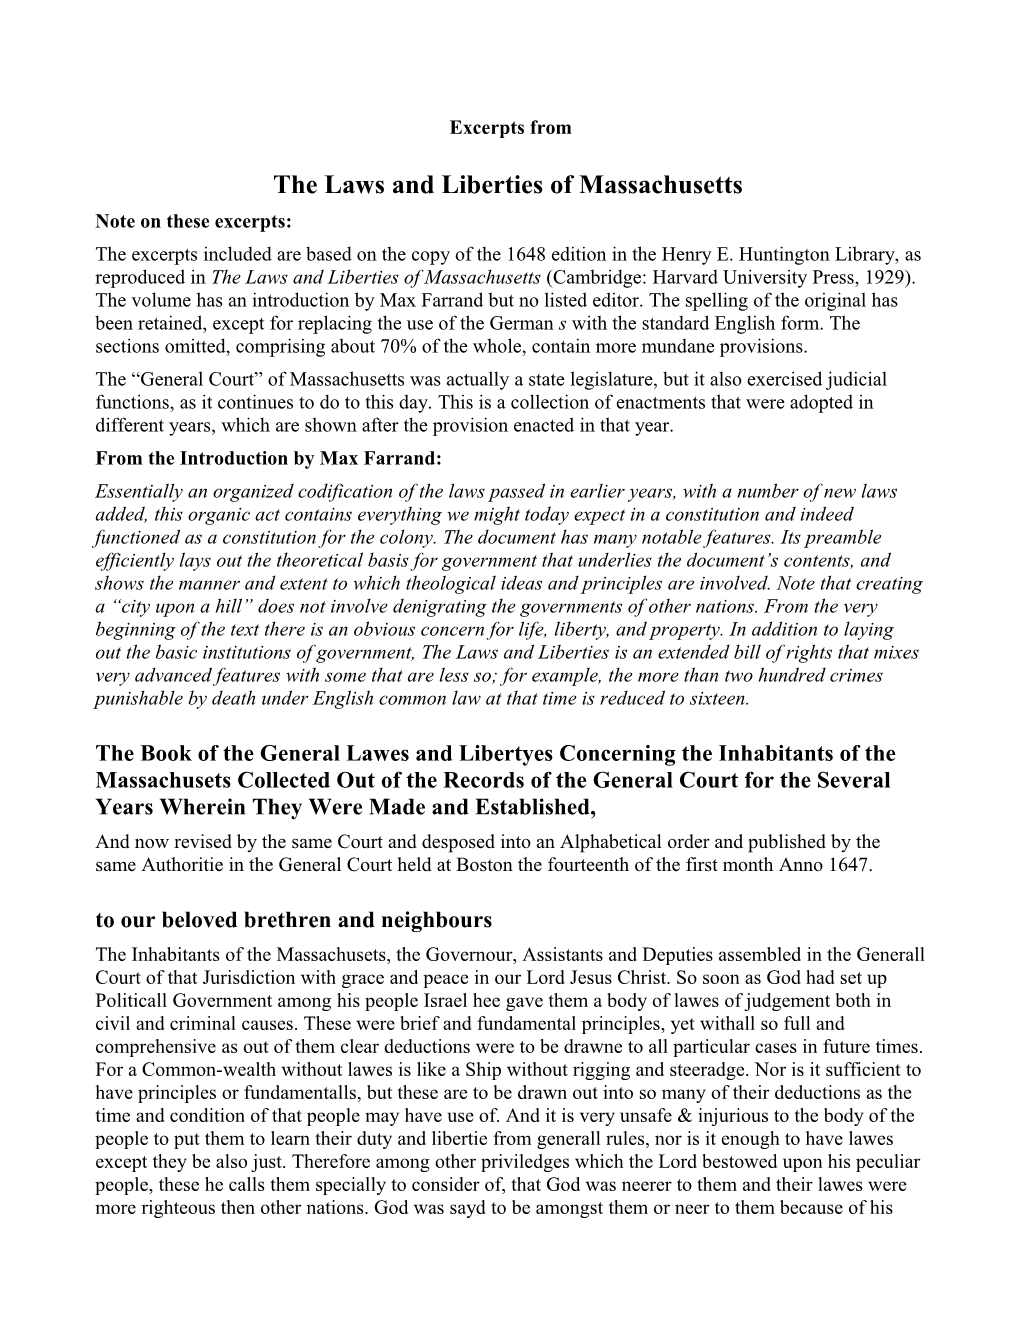 The Laws and Liberties of Massachusetts